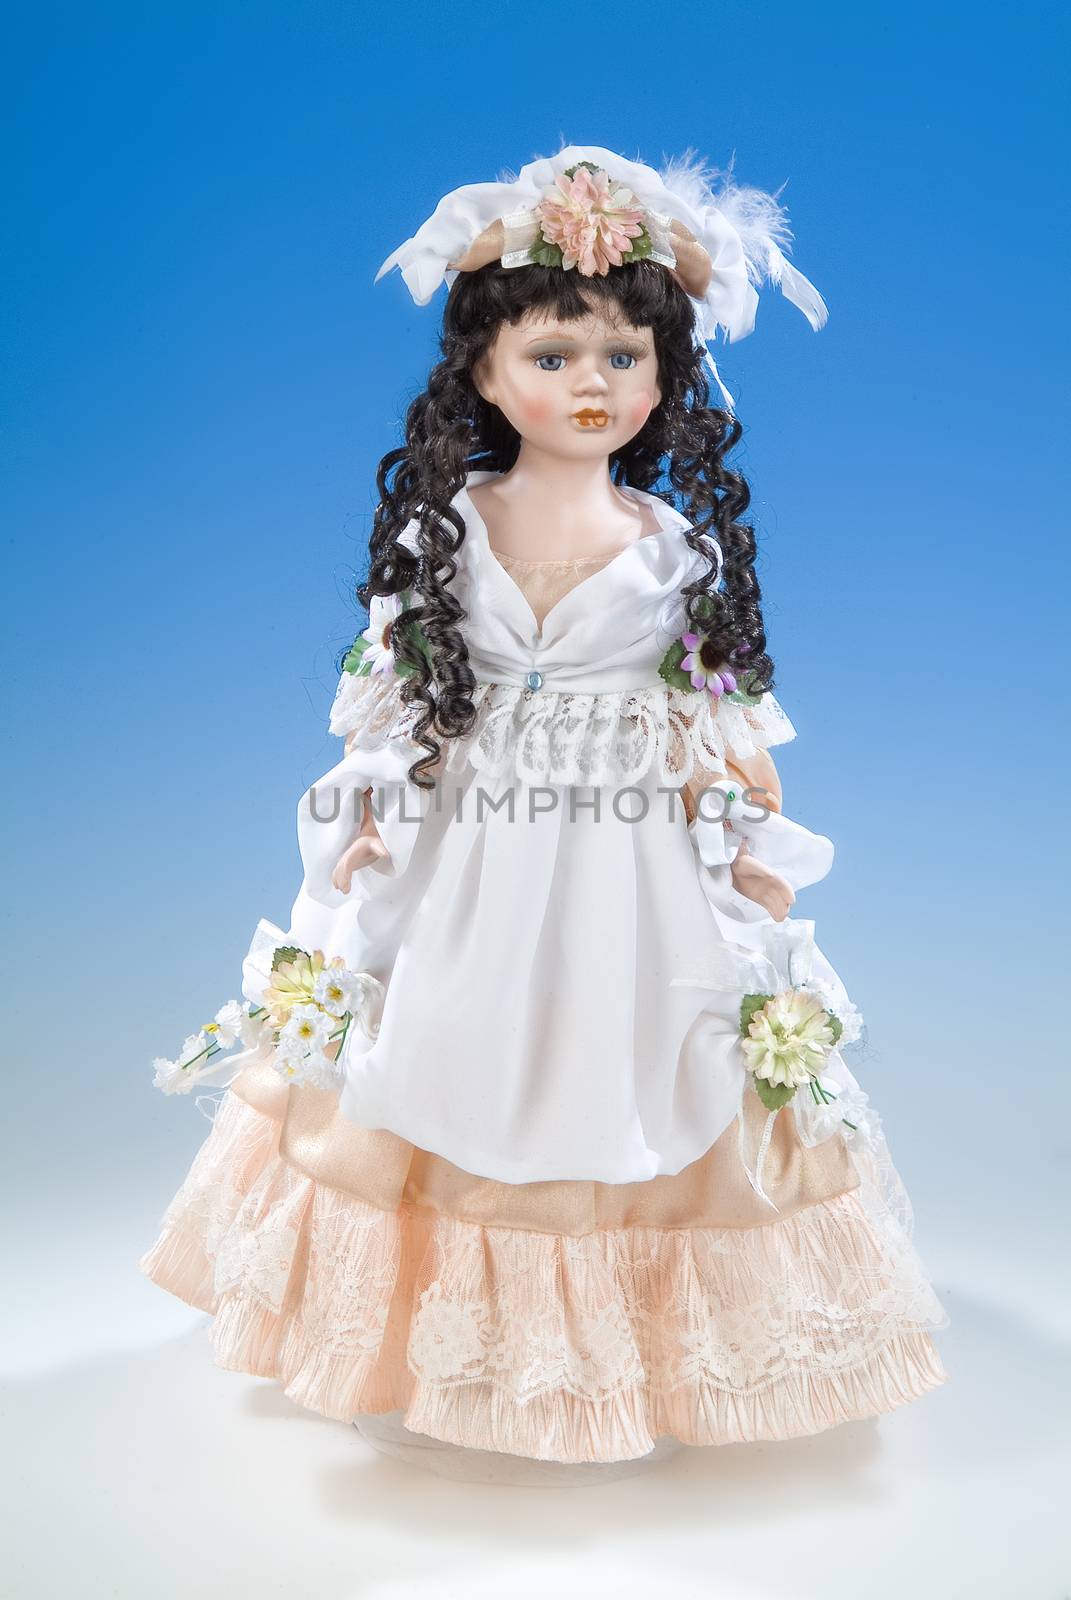 Big doll dressed in retro style on a blue and white background